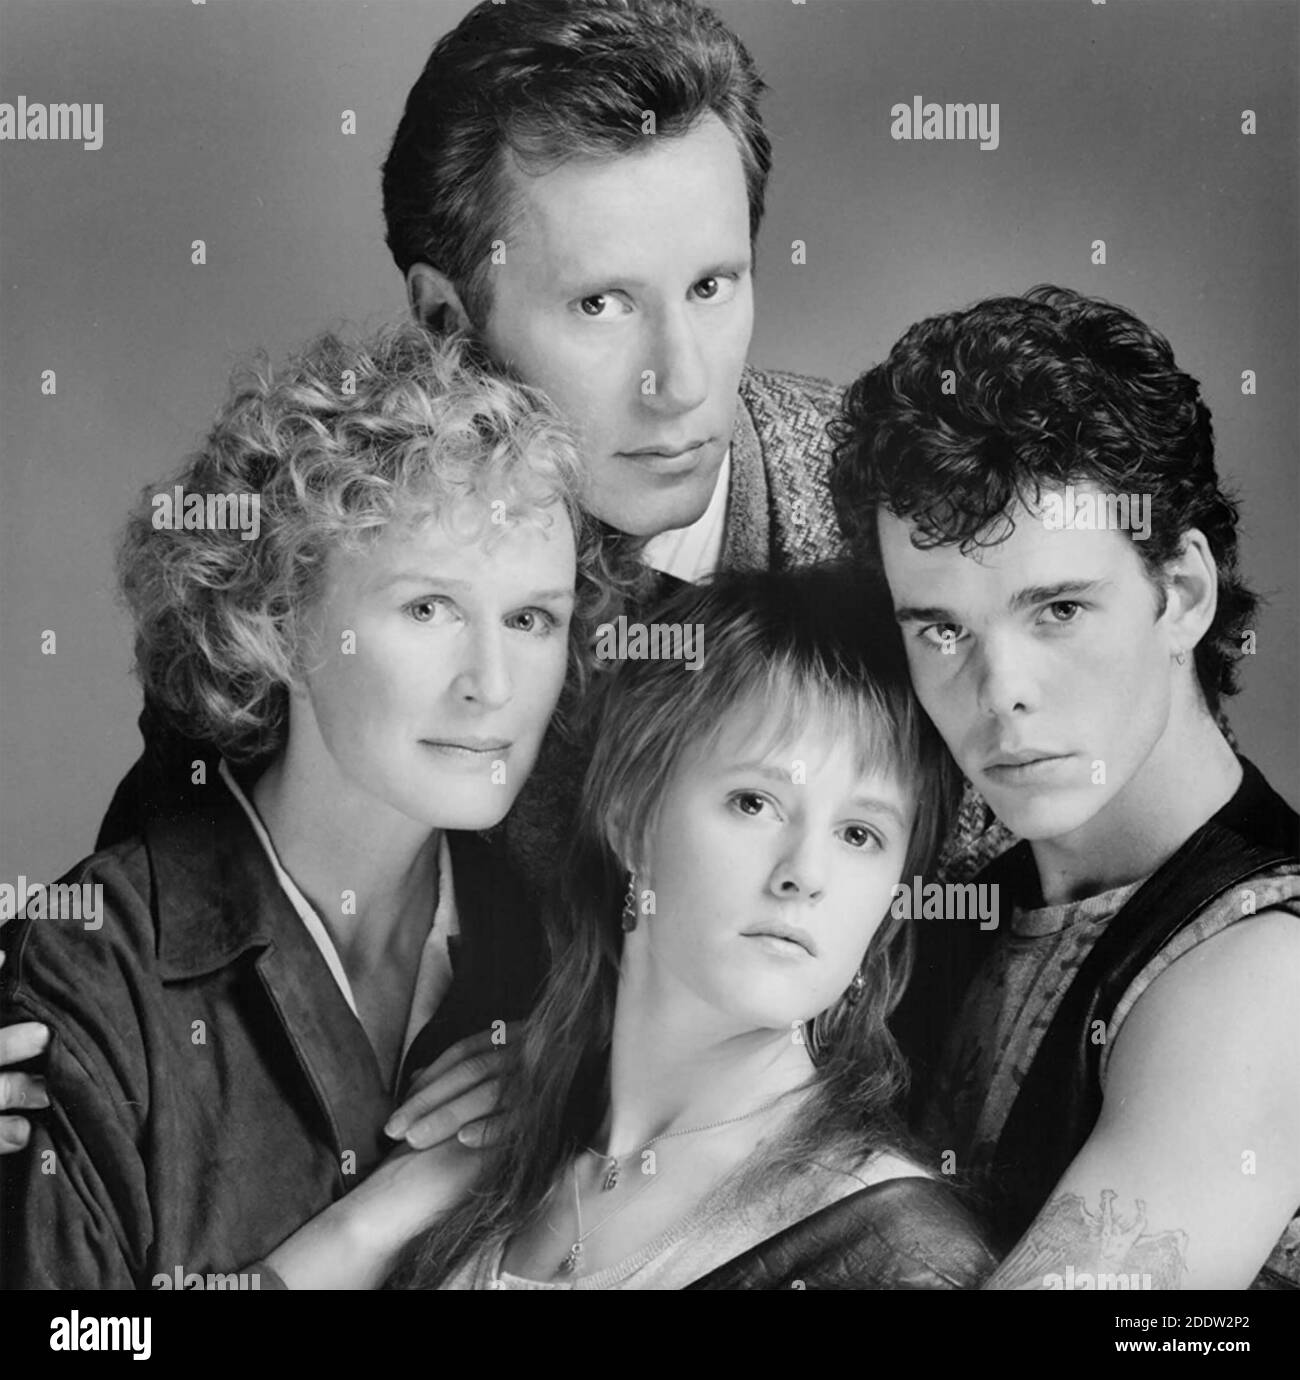 UNMITTELBARE FAMILIE 1989 Columbia Pictures Film mit von links: Glen Close, James Woods,Mary Stuart Masterson, Kevin Dillon Stockfoto